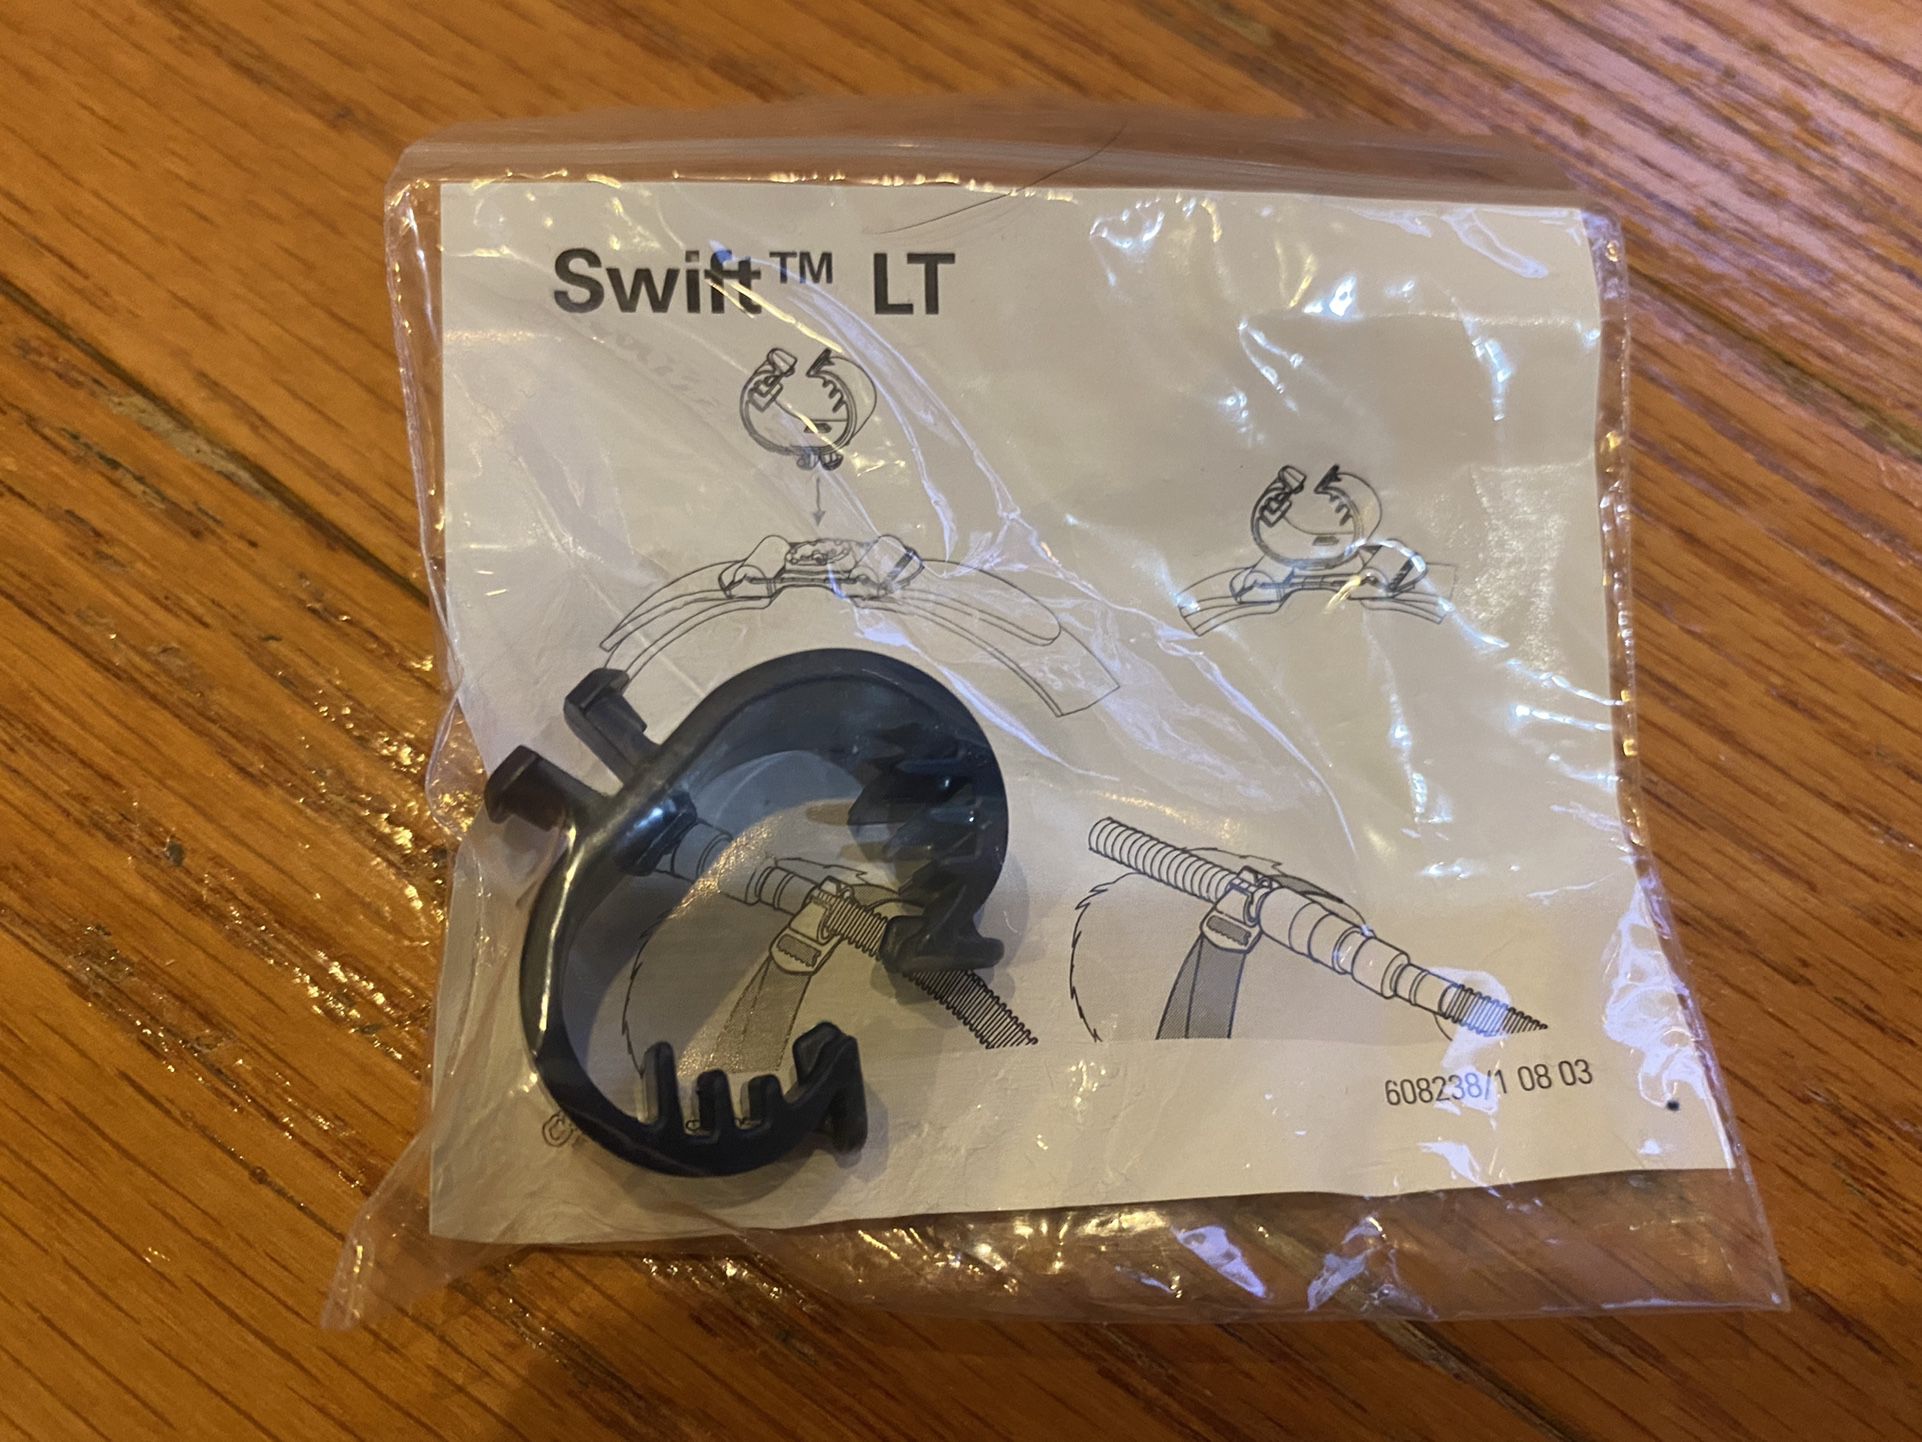 Free - Clip For Tubing On Swift LT C-pap Head Piece. 